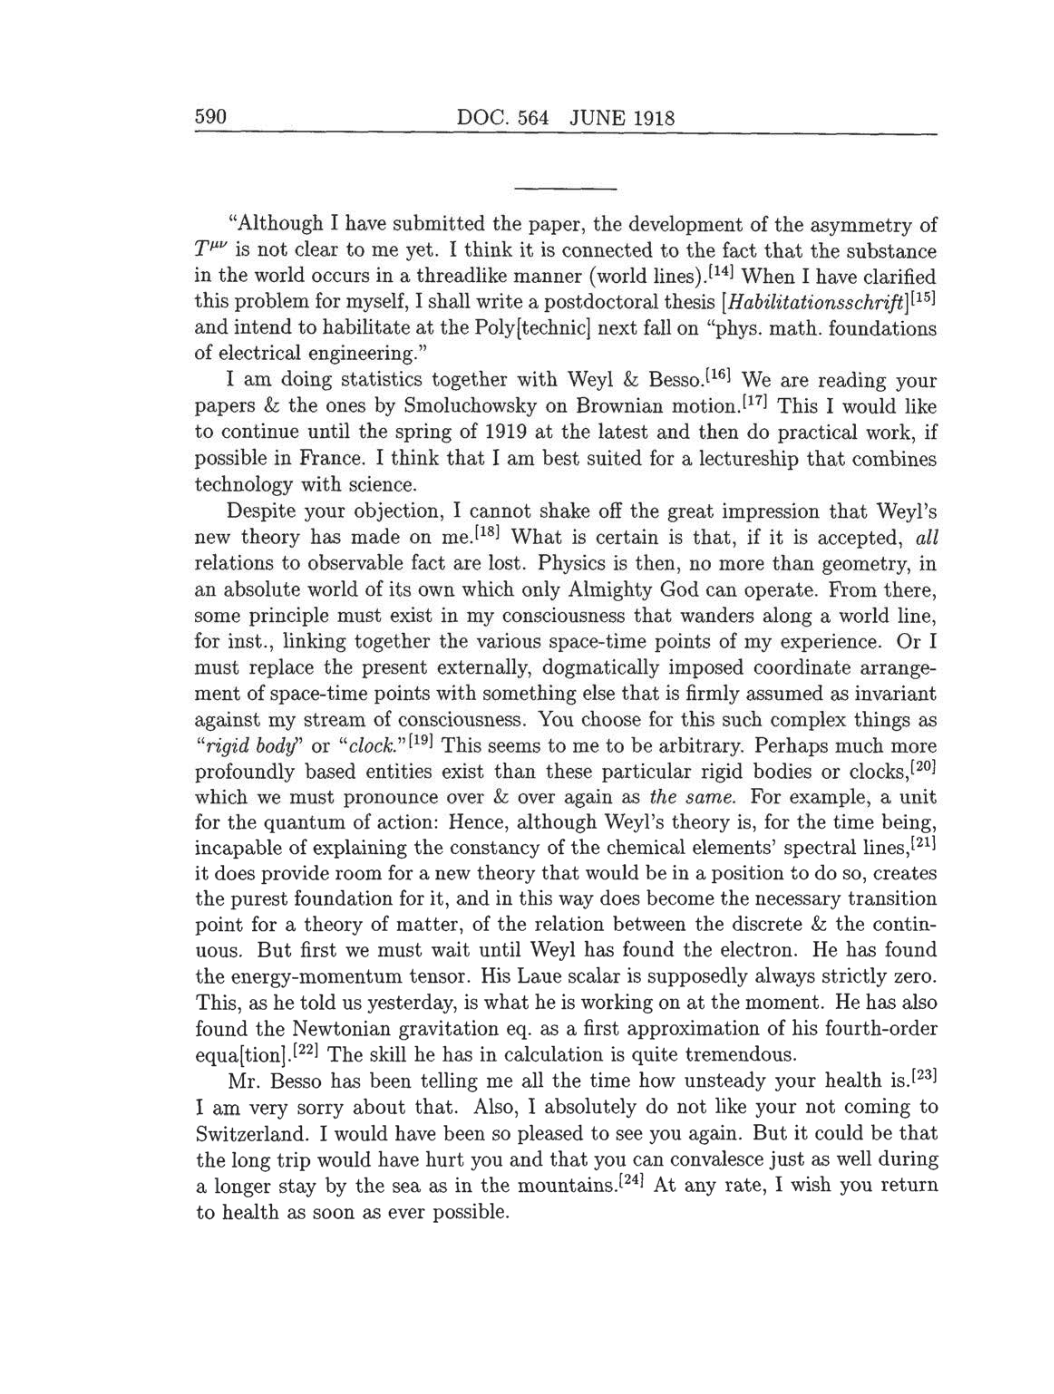 Volume 8: The Berlin Years: Correspondence, 1914-1918 (English translation supplement) page 590